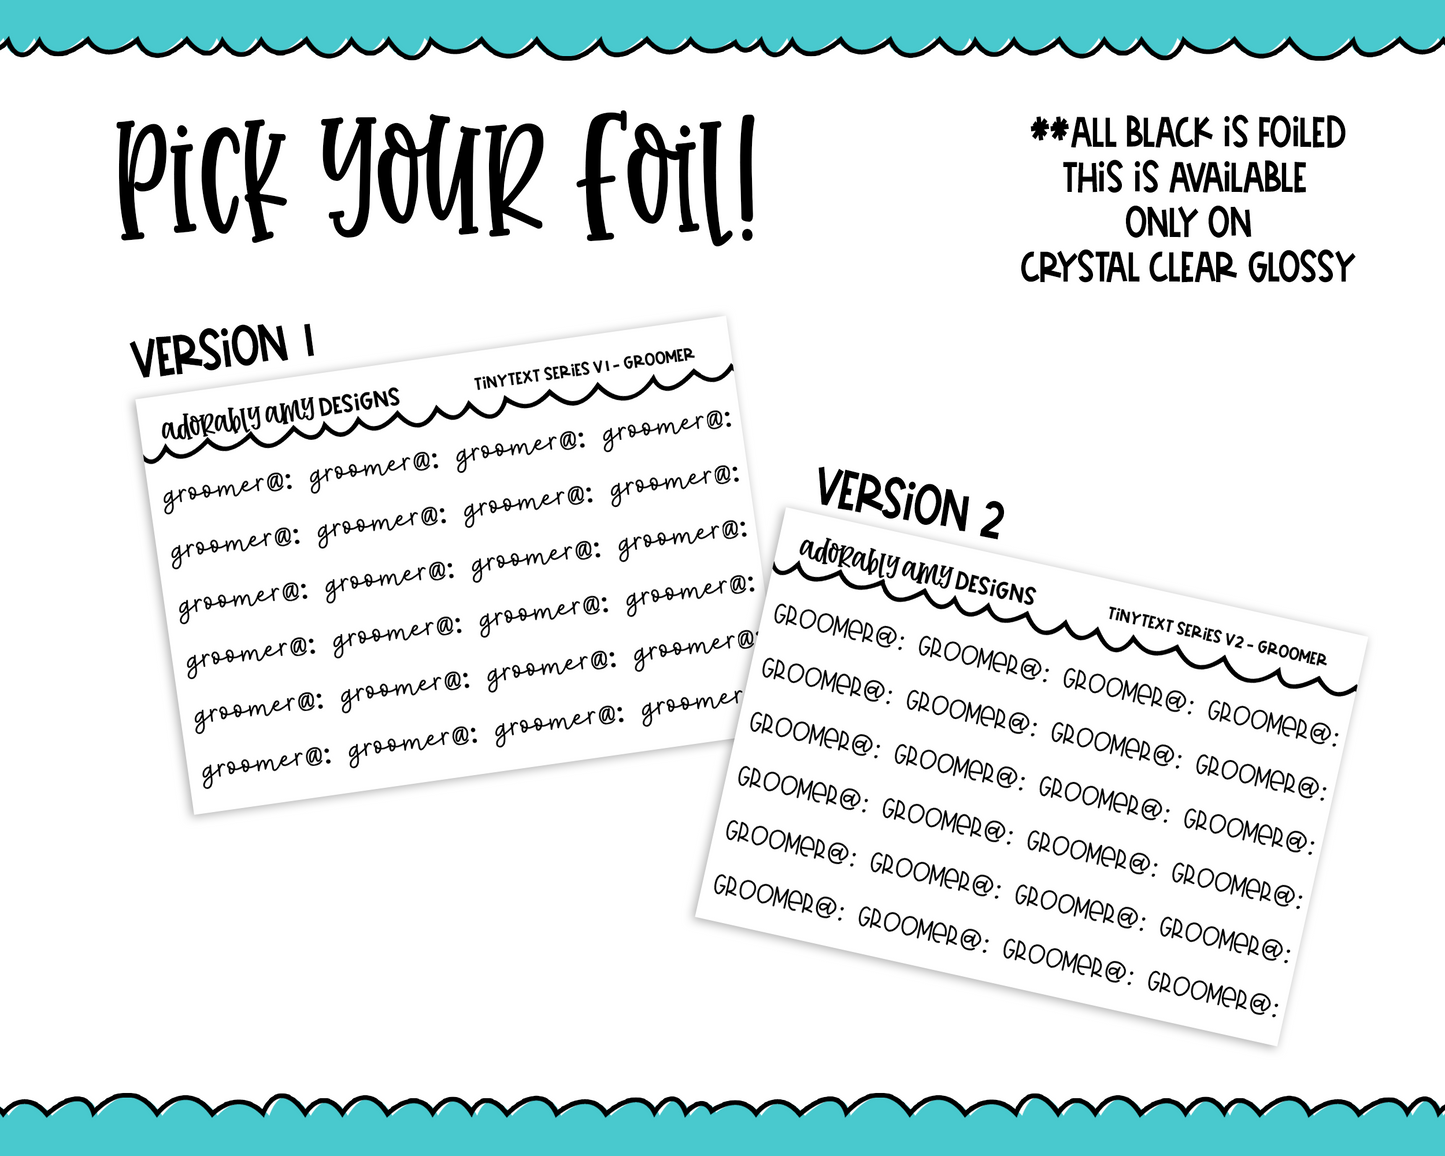 Foiled Tiny Text Series - Groomer Checklist Size Planner Stickers for any Planner or Insert